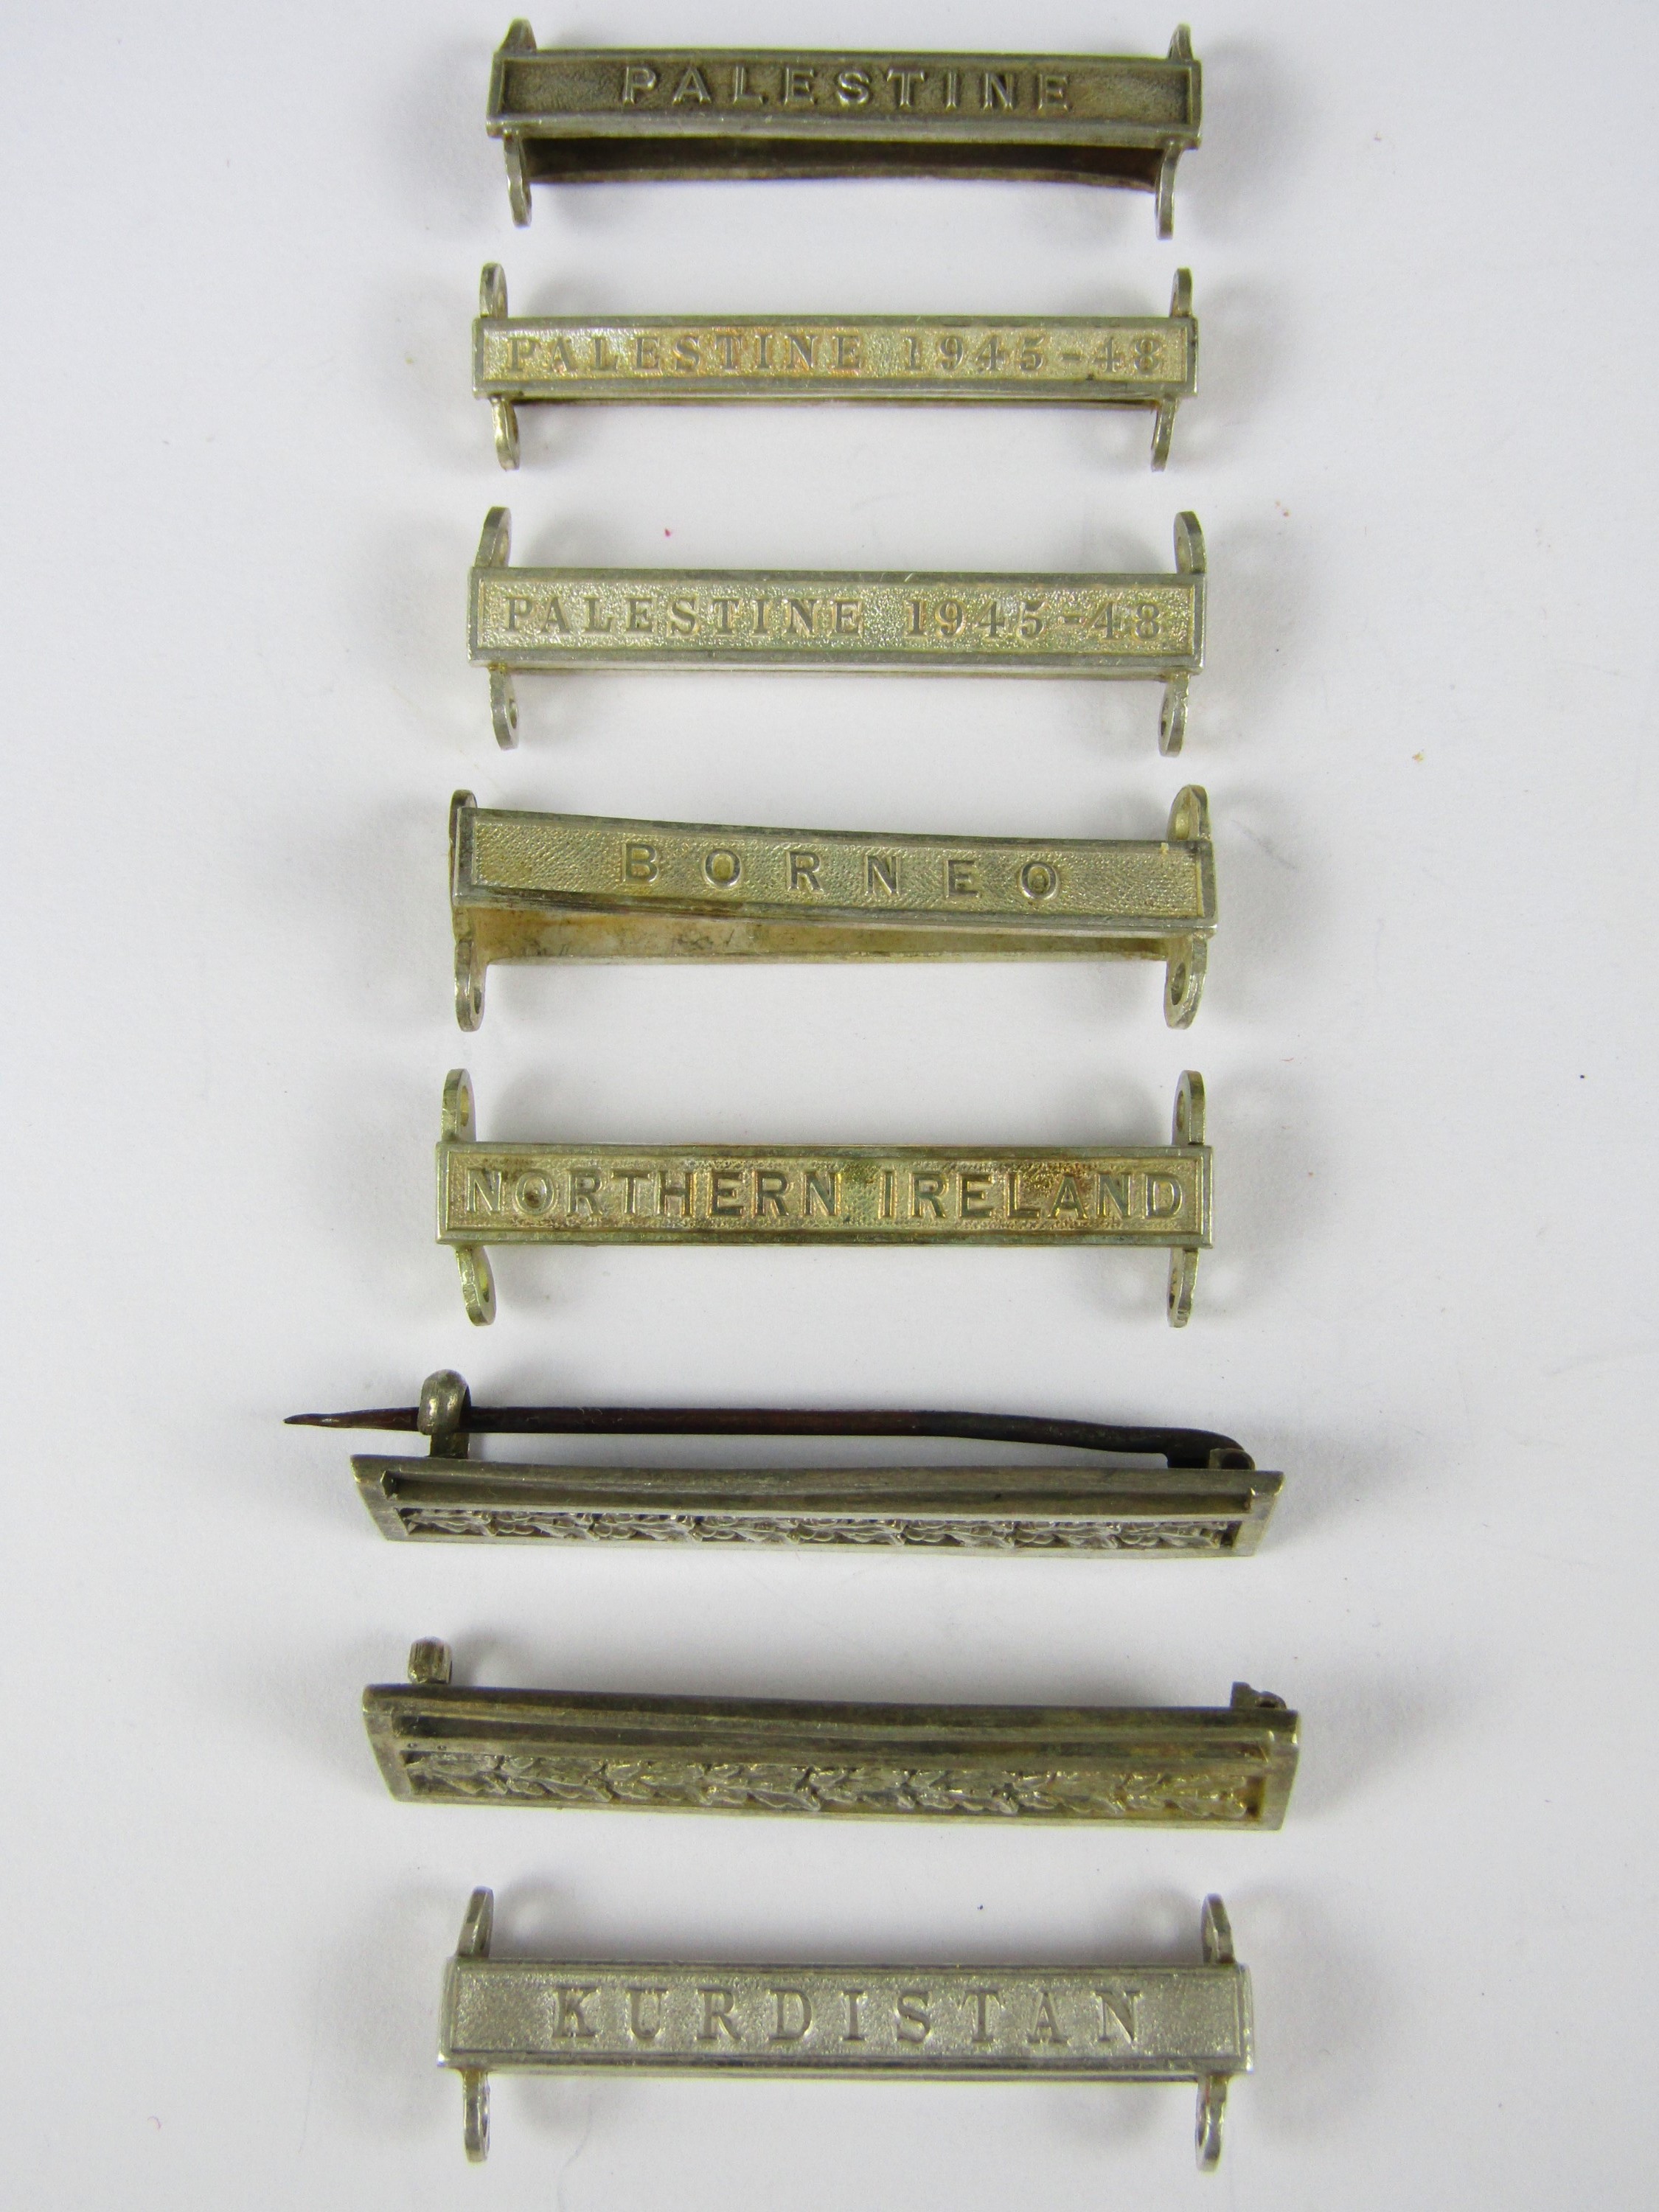 Two medal suspenders and various General Service Medal clasps